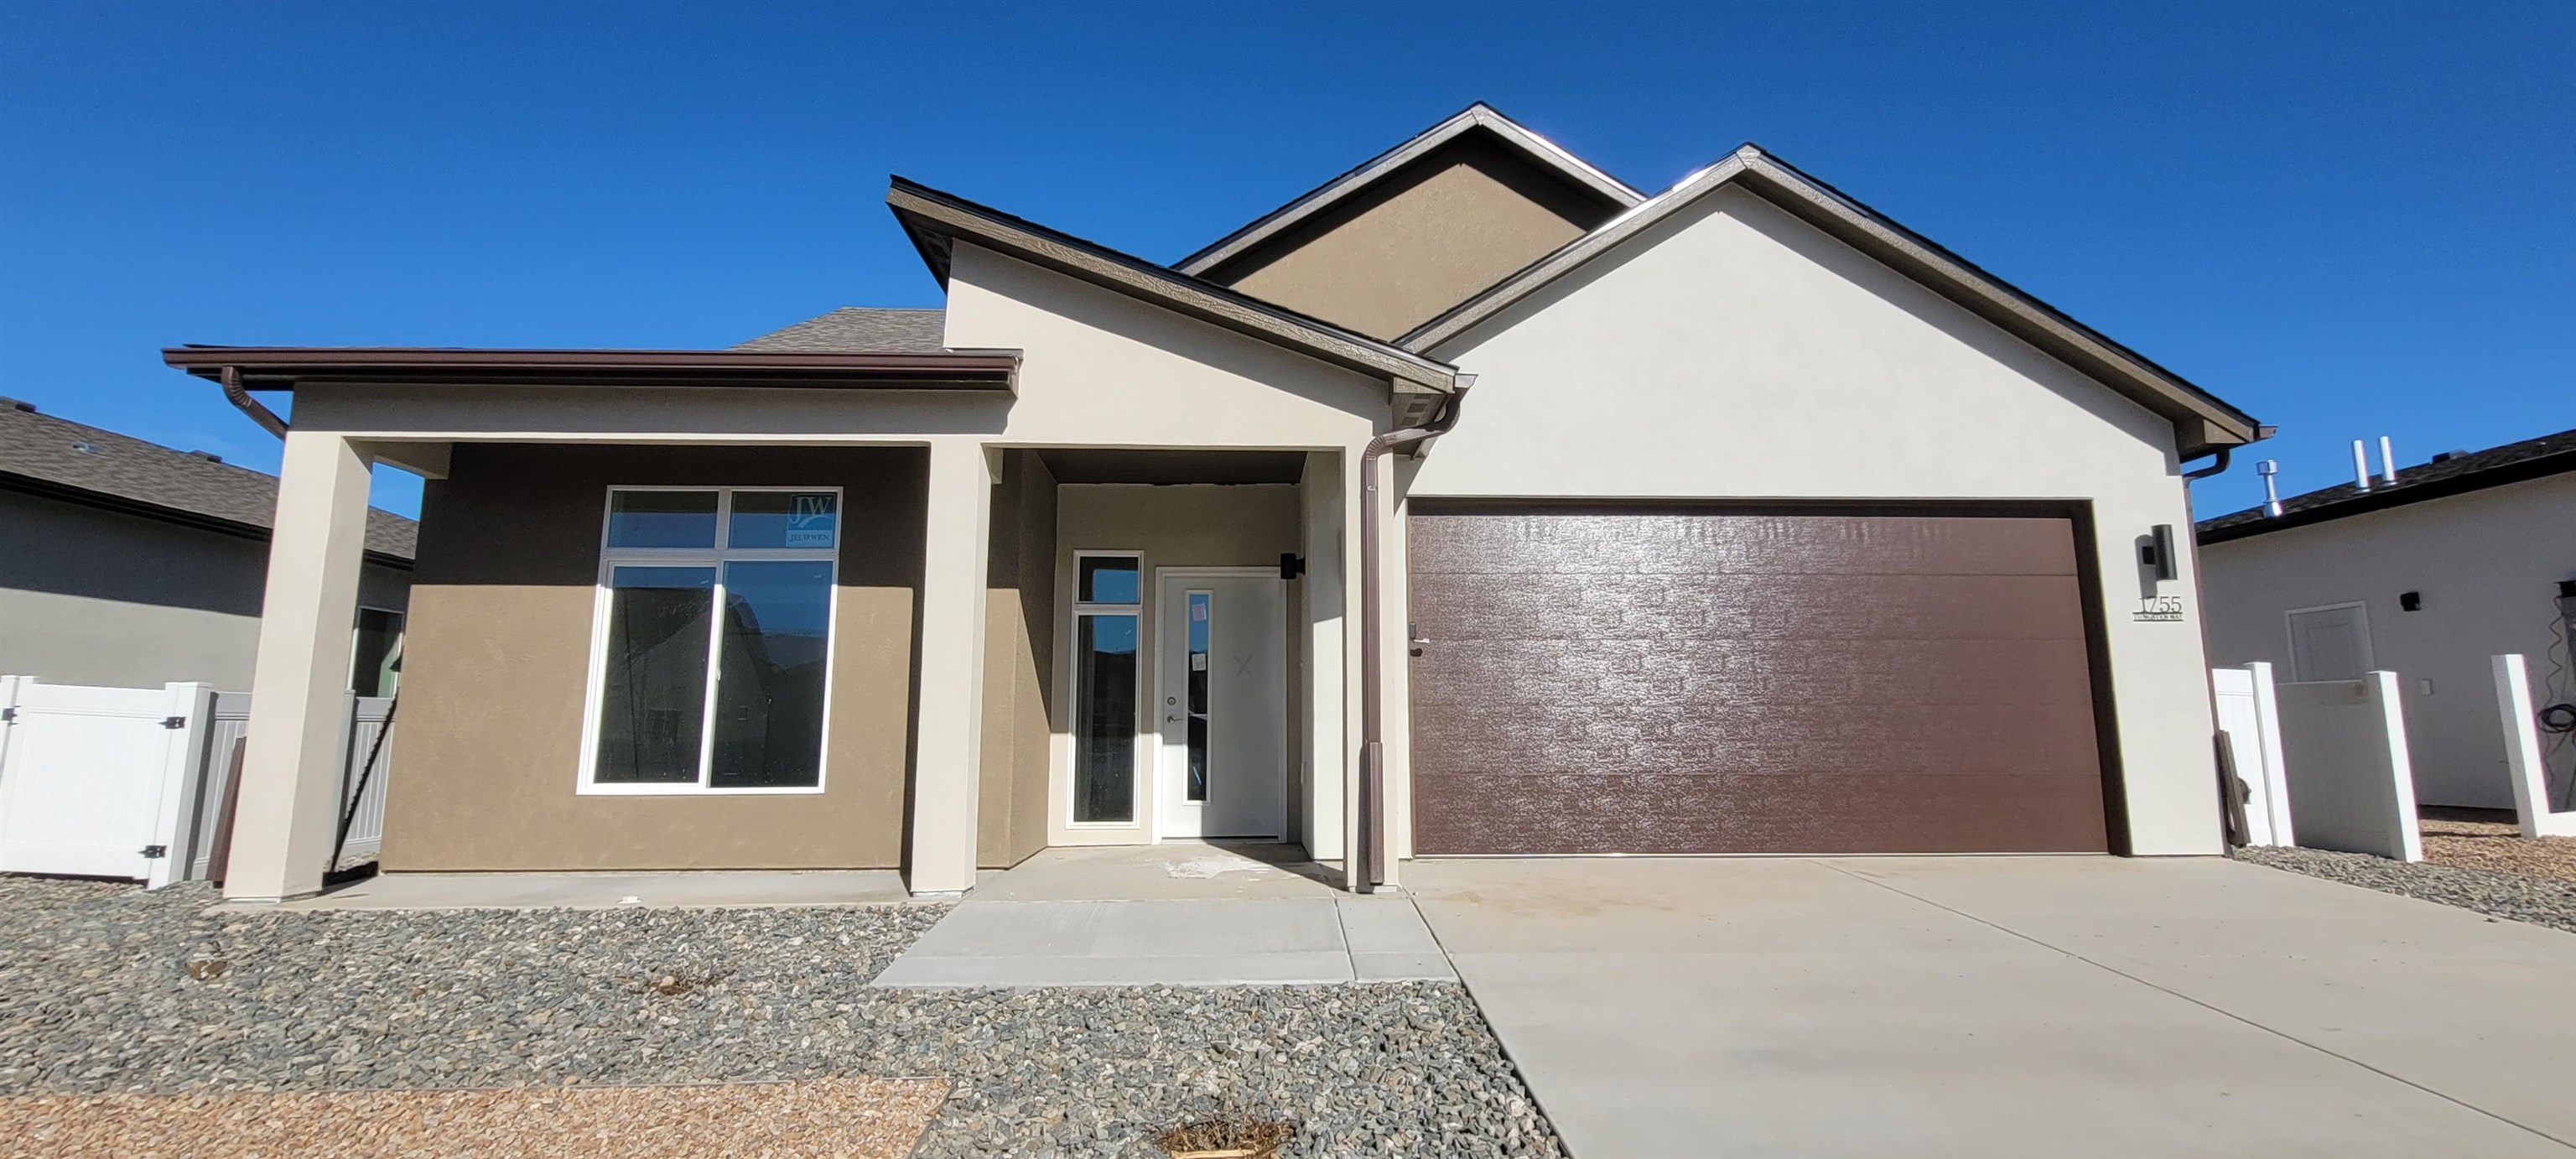 Welcome to Iron Wheel subdivision where affordability meets function!   TWO UNIQUE AND CREATIVE PREFERRED LENDER OPTIONS THAT MAY SAVE YOU UP TO SEVERAL HUNDRED DOLLARS ON YOUR PAYMENT - NO GIMMICKS - CALL FOR DETAILS!   This one-of-a-kind community will have a wide variety of home types and sizes, a walking path to FMHS, neighborhood park & easy access to both GJ & Fruita.   Pricing includes xeriscaping & fencing.  These well-planned homes offer maximum functional use of space, durable yet beautiful finishes & cute outdoor living spaces that require minimal maintenance.